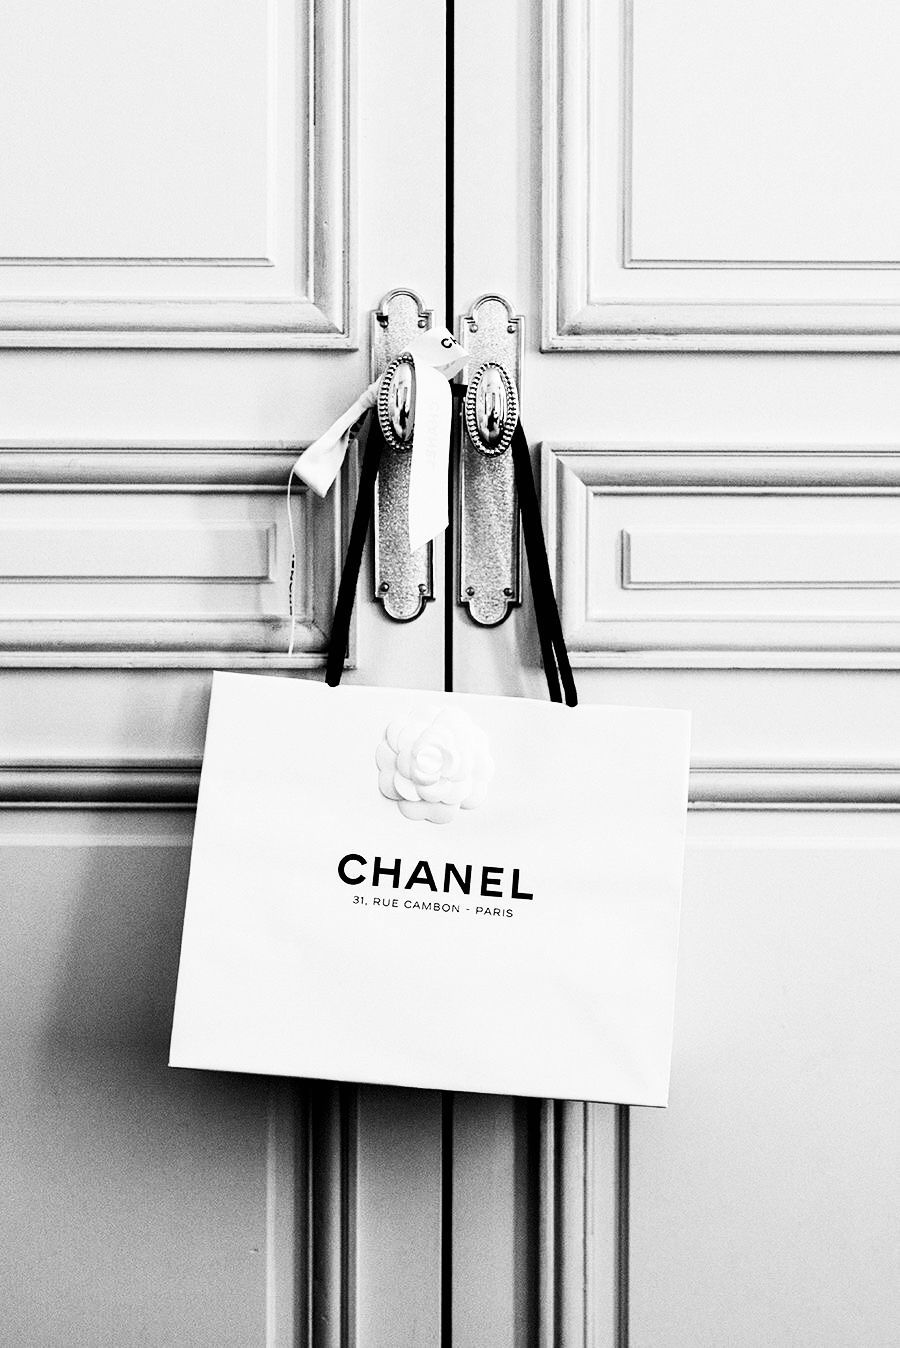 Download 55 Chanel Wallpaper Iphone Aesthetic Foto Download - Posts.id